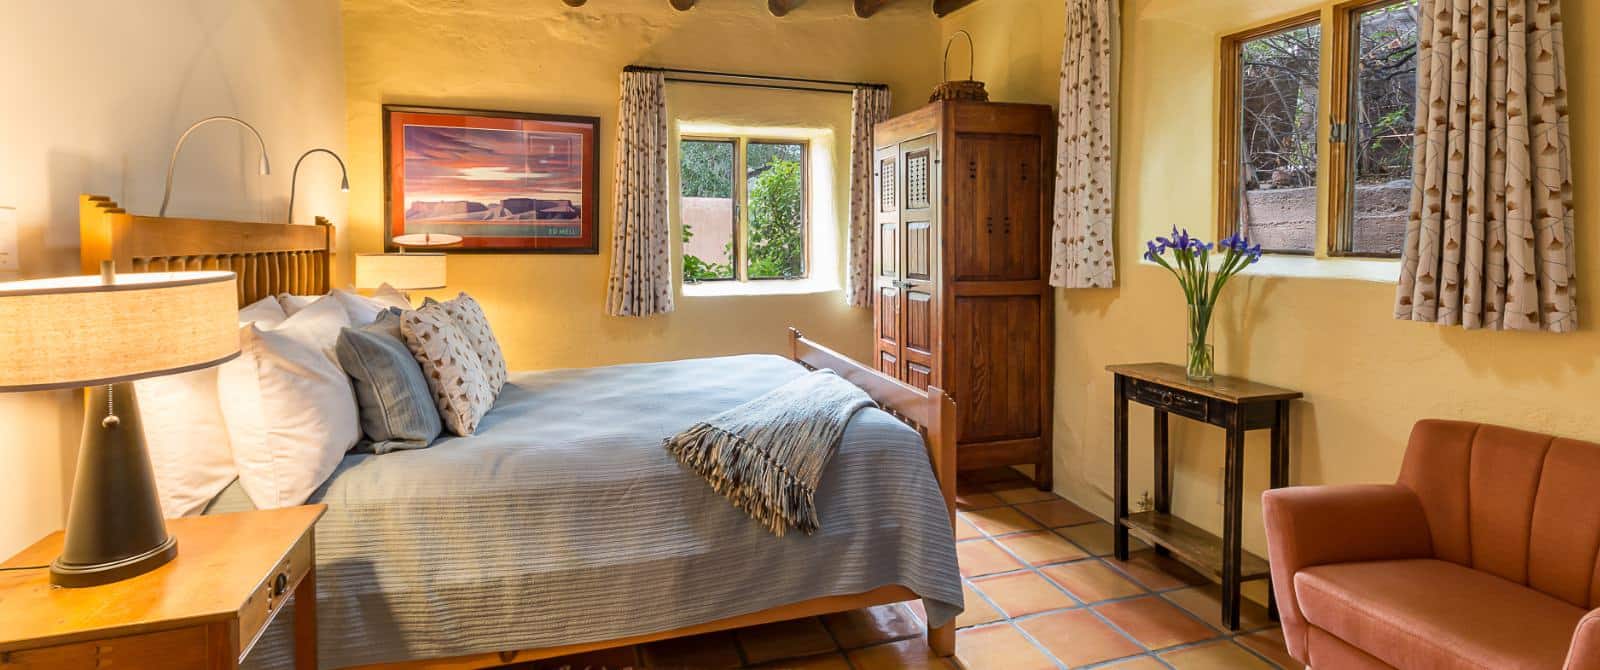 Southwestern-style bedroom with queen bed, wooden armoire and Saltillo tile floor.